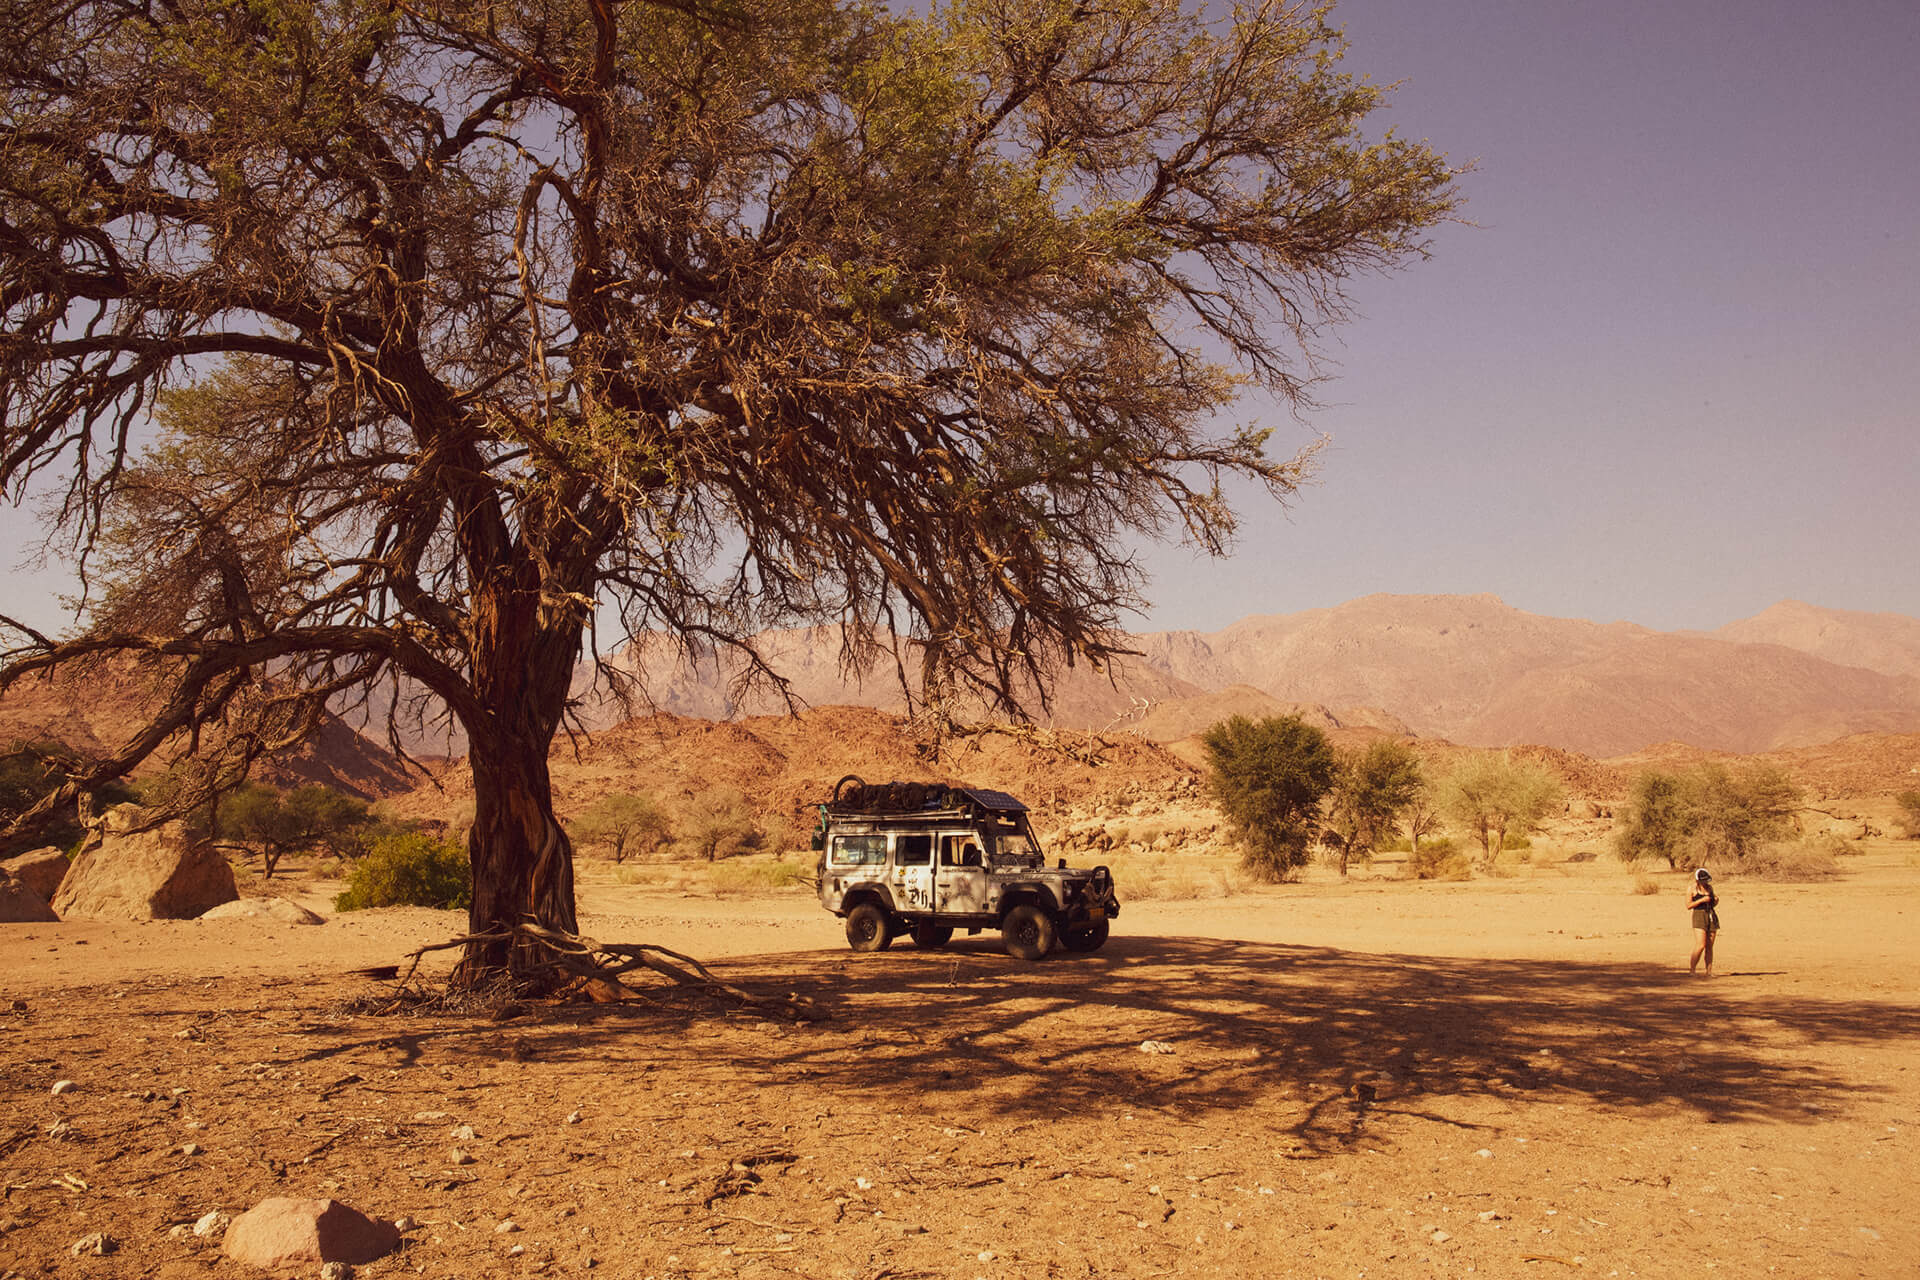 Landrover in shadow Namibia